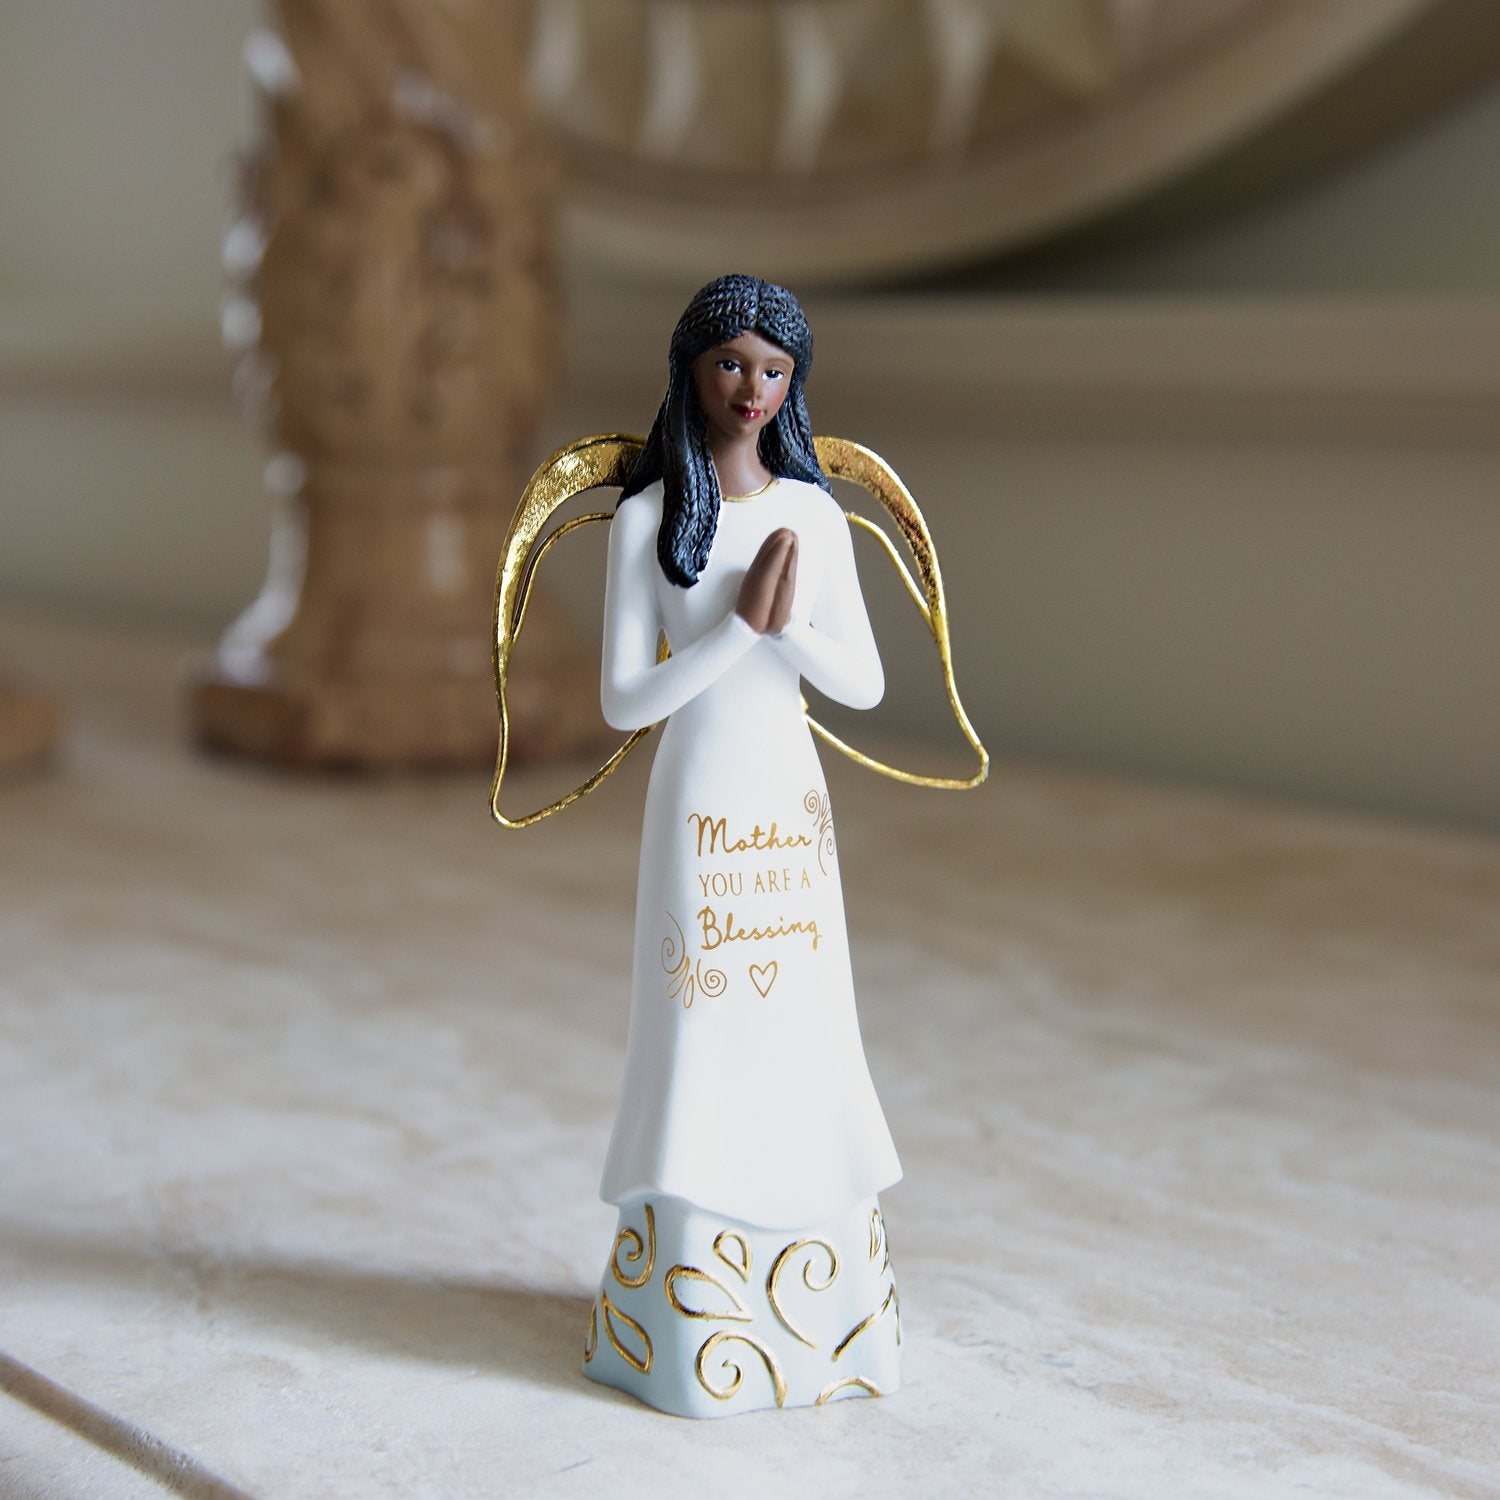 4 of 5: Mother, You Are a Blessing by Amylee Weeks: African American Angel Figurine (Lifestyle)